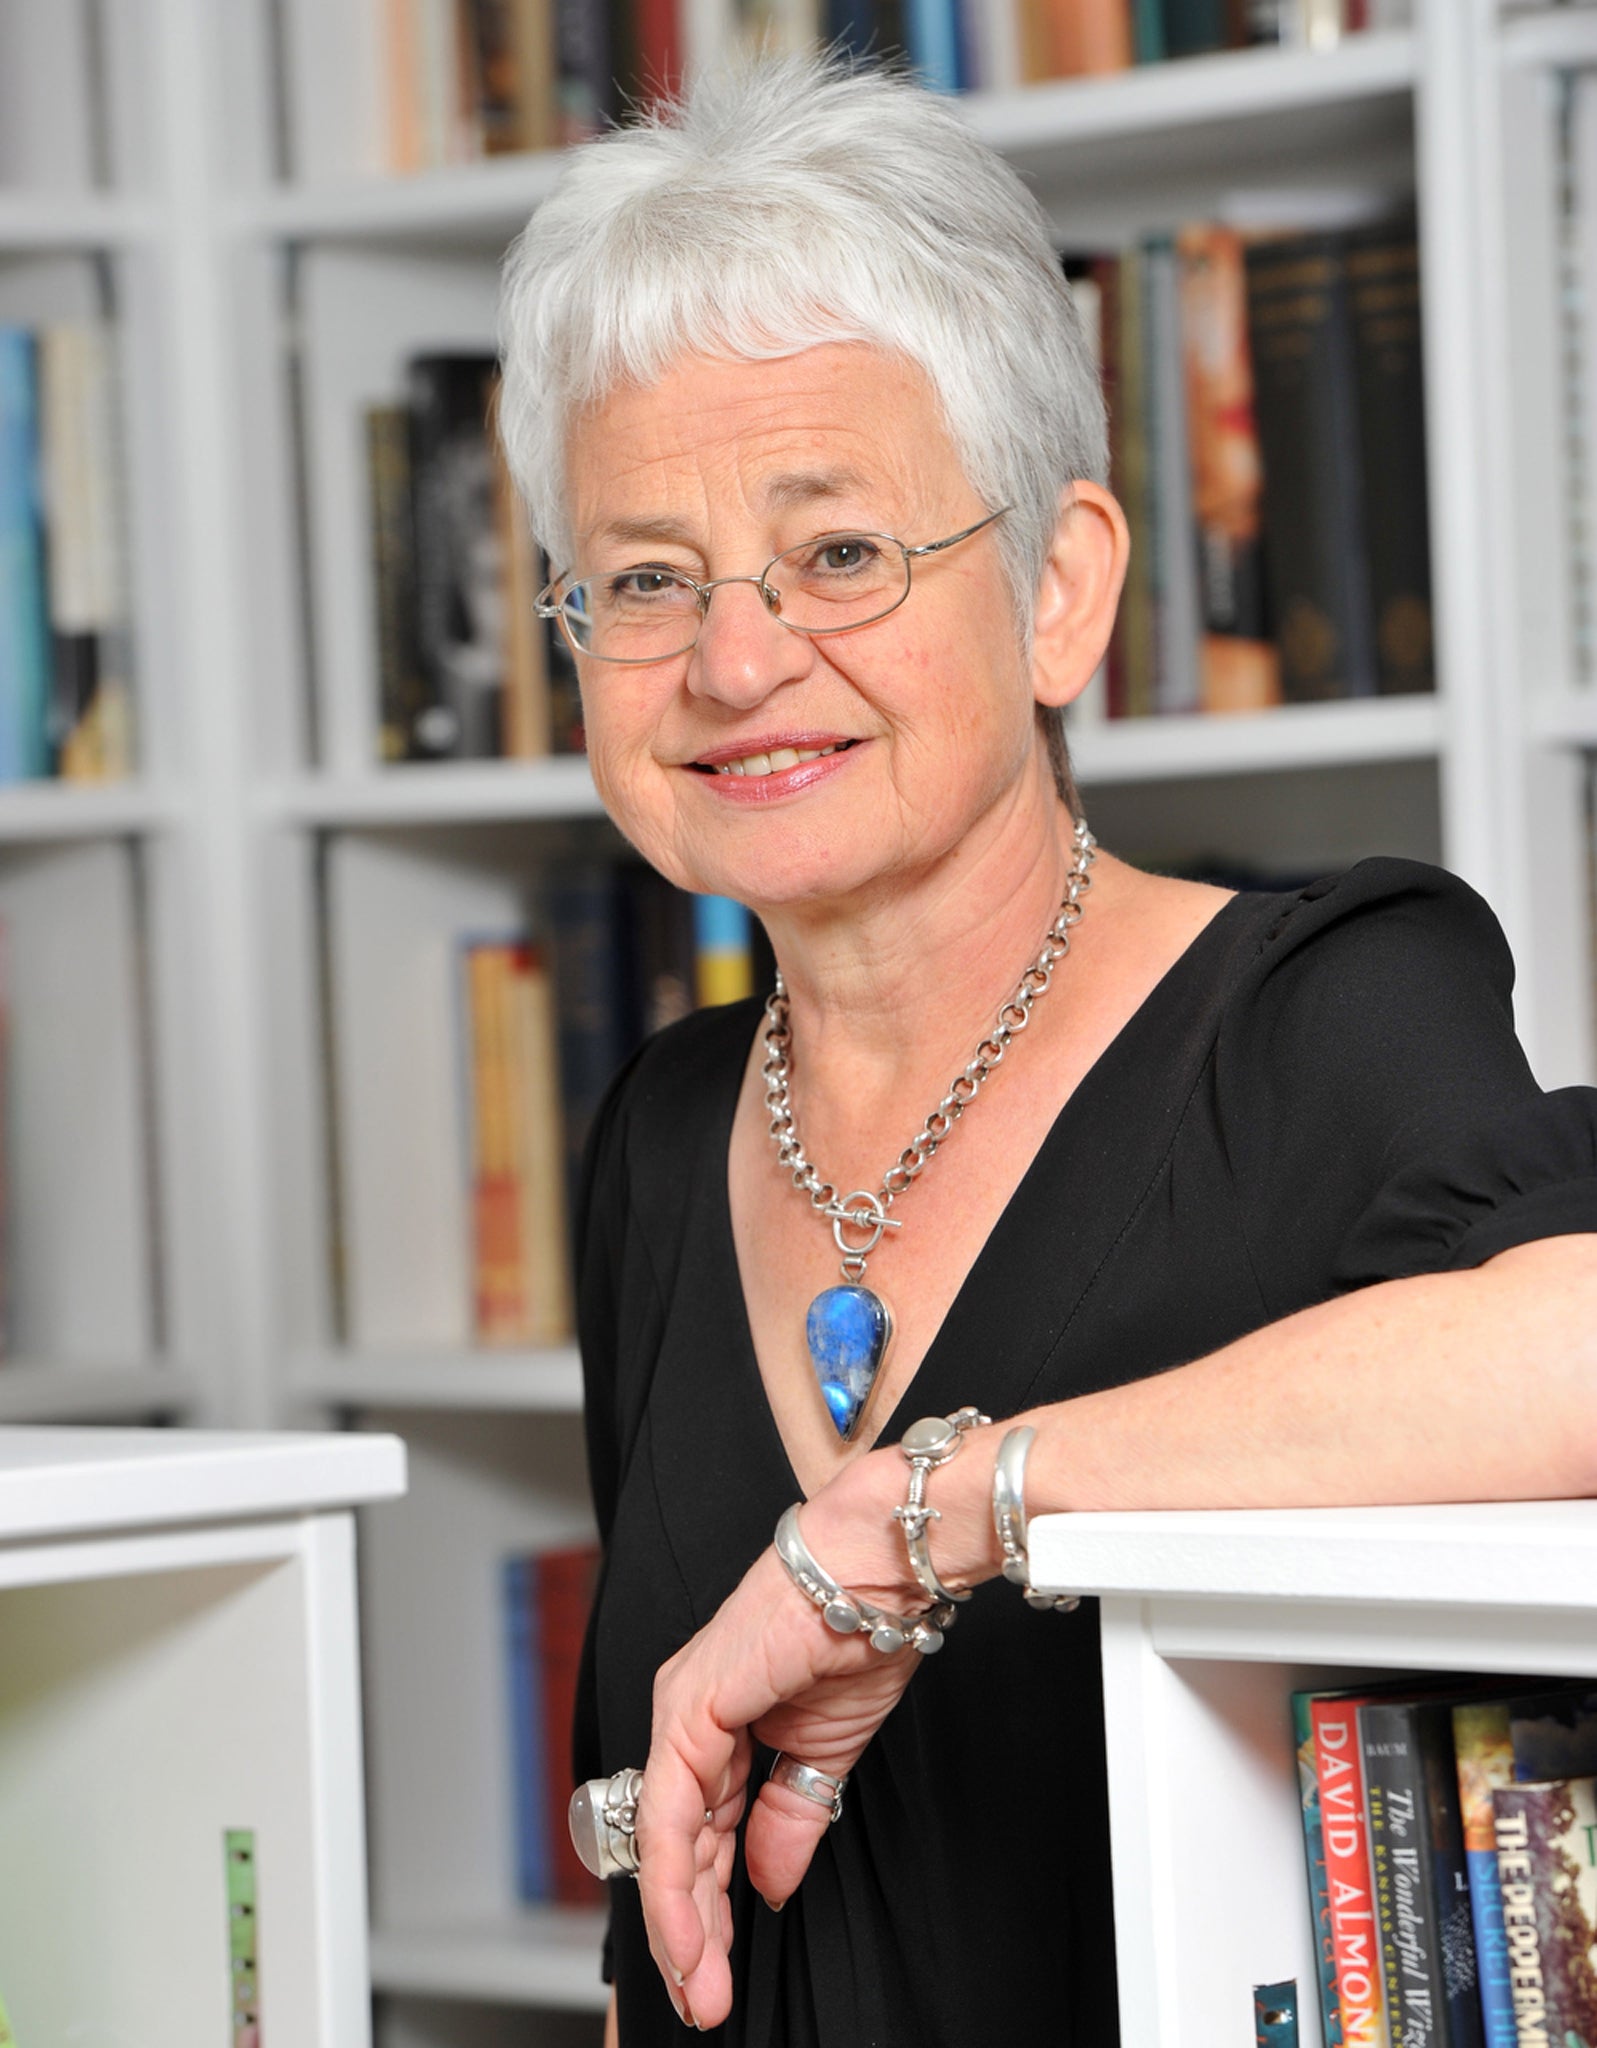 Author Jacqueline Wilson says she is a fan of Gogglebox and One Born Every Minute